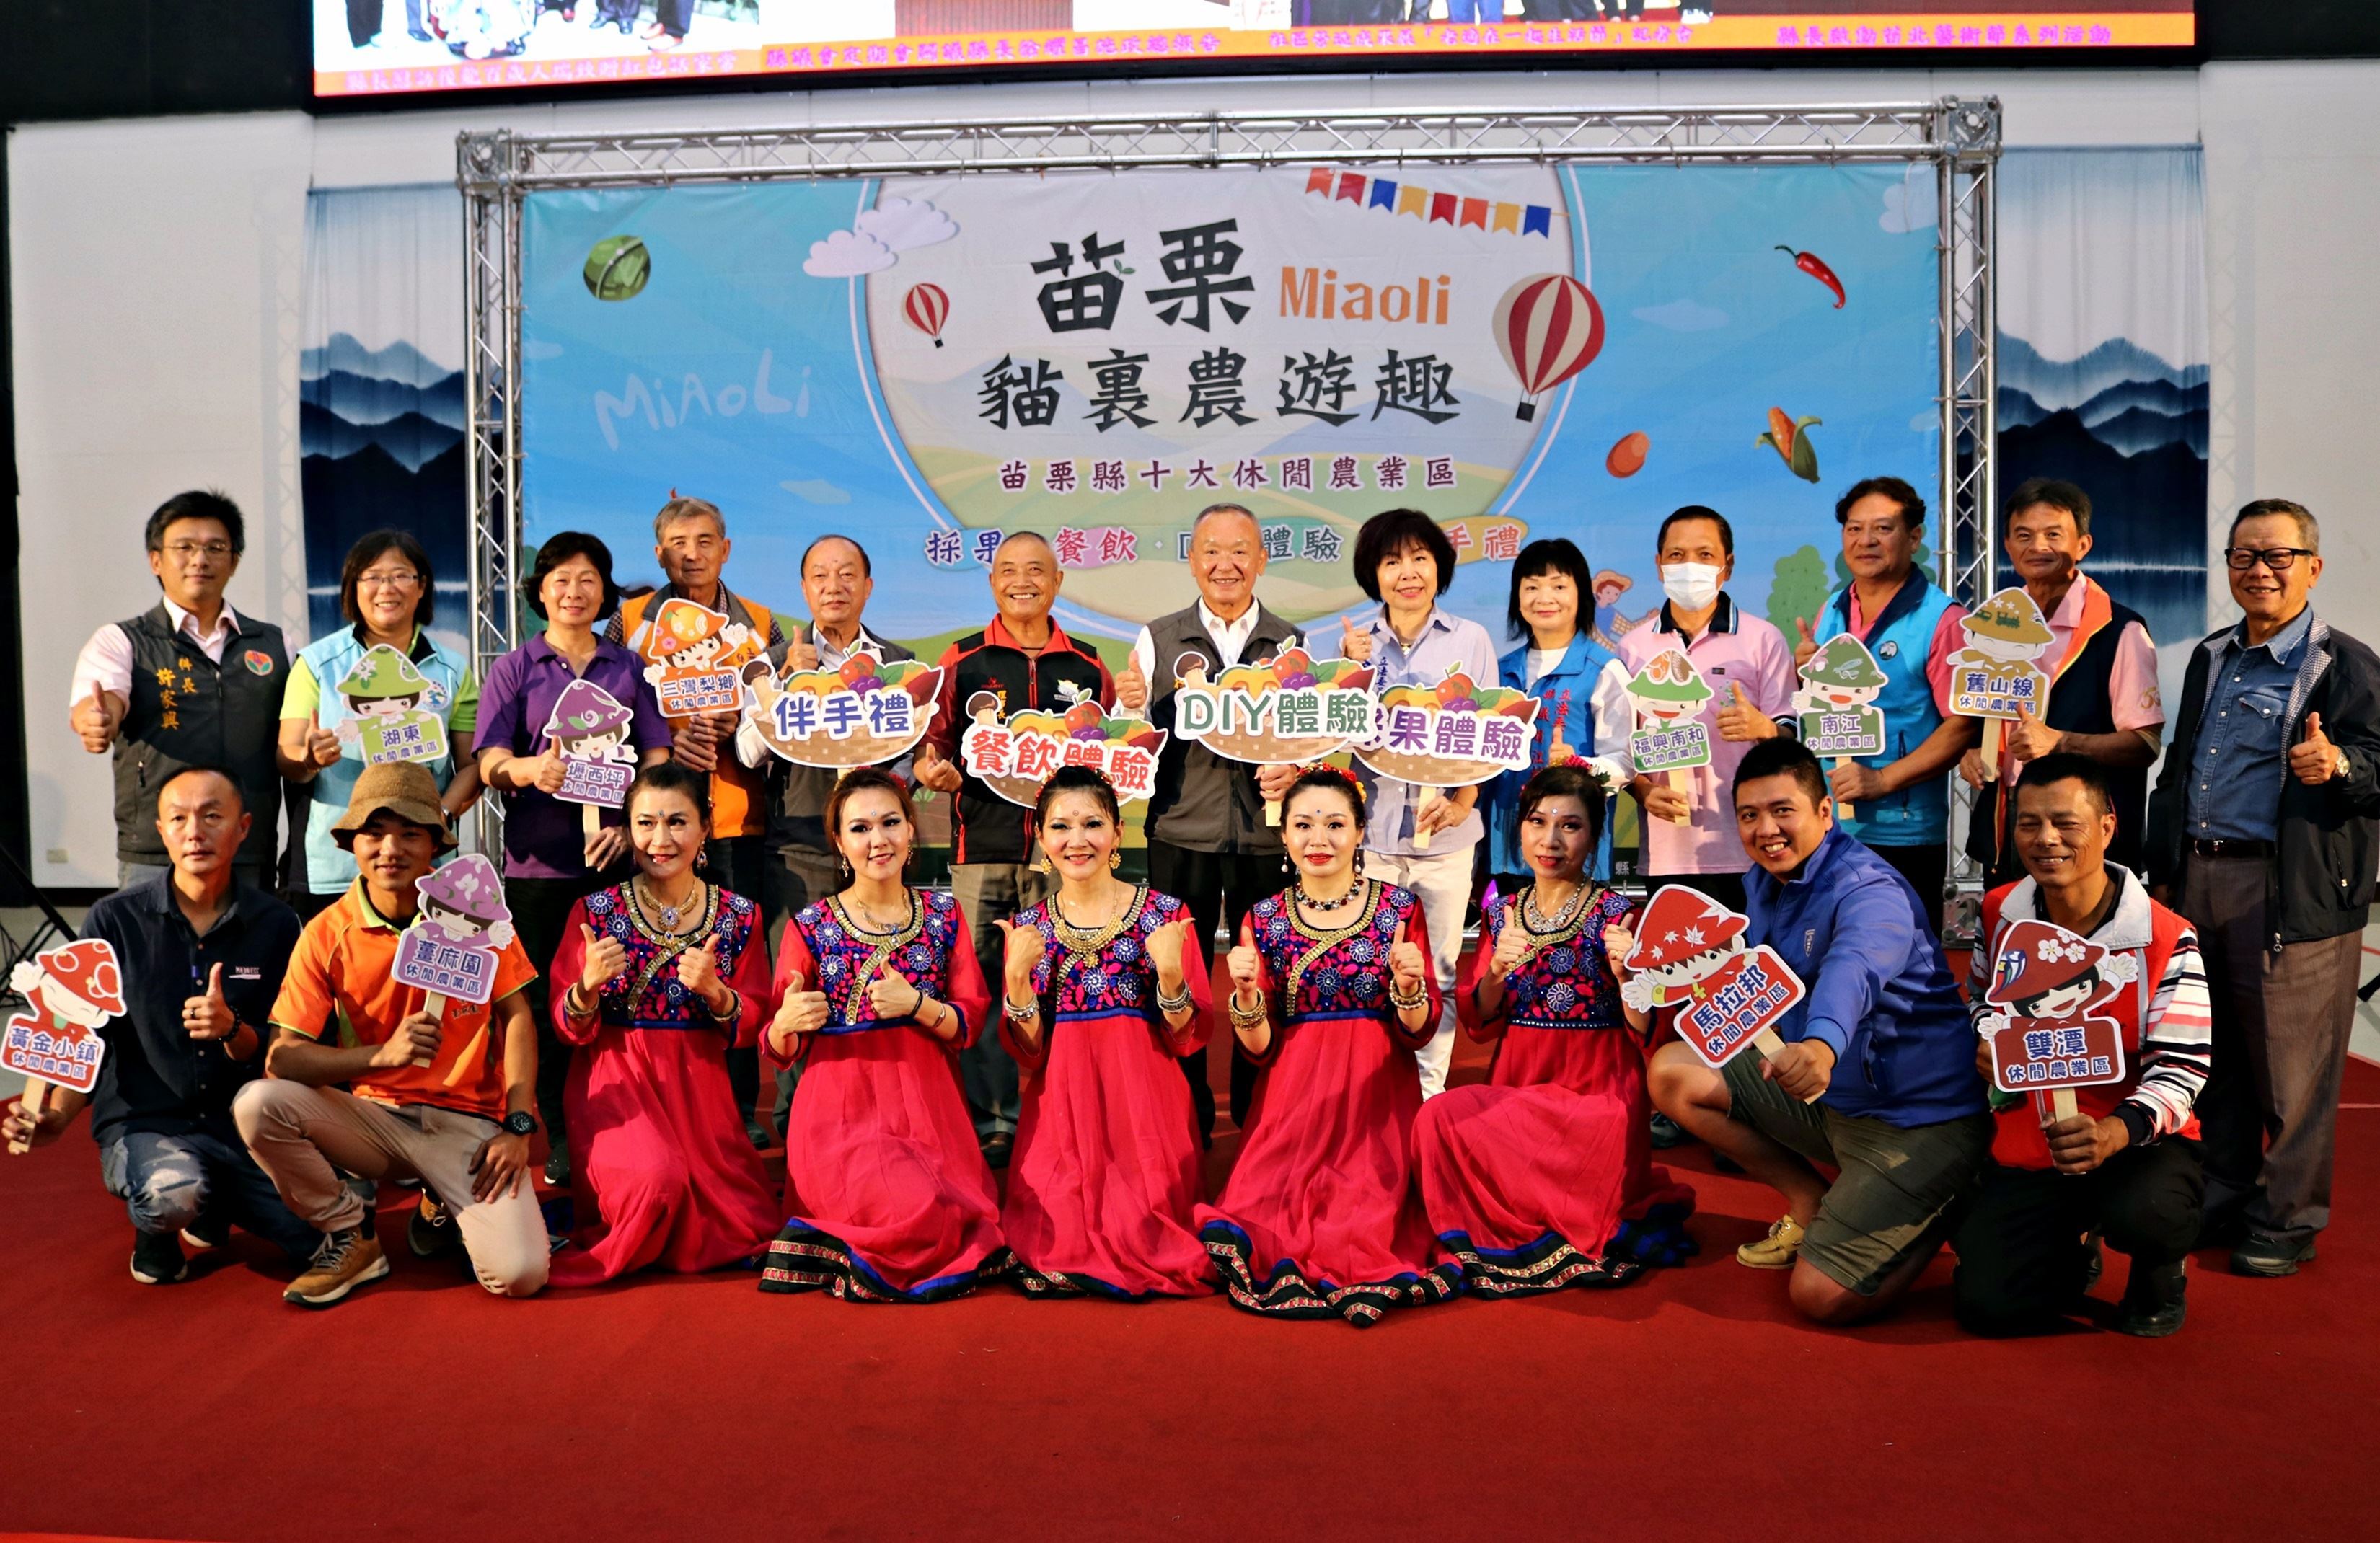 Miaoli County Government Promotes “Miaoli Fun Agricultural Tour” at Taichung Travel Fair